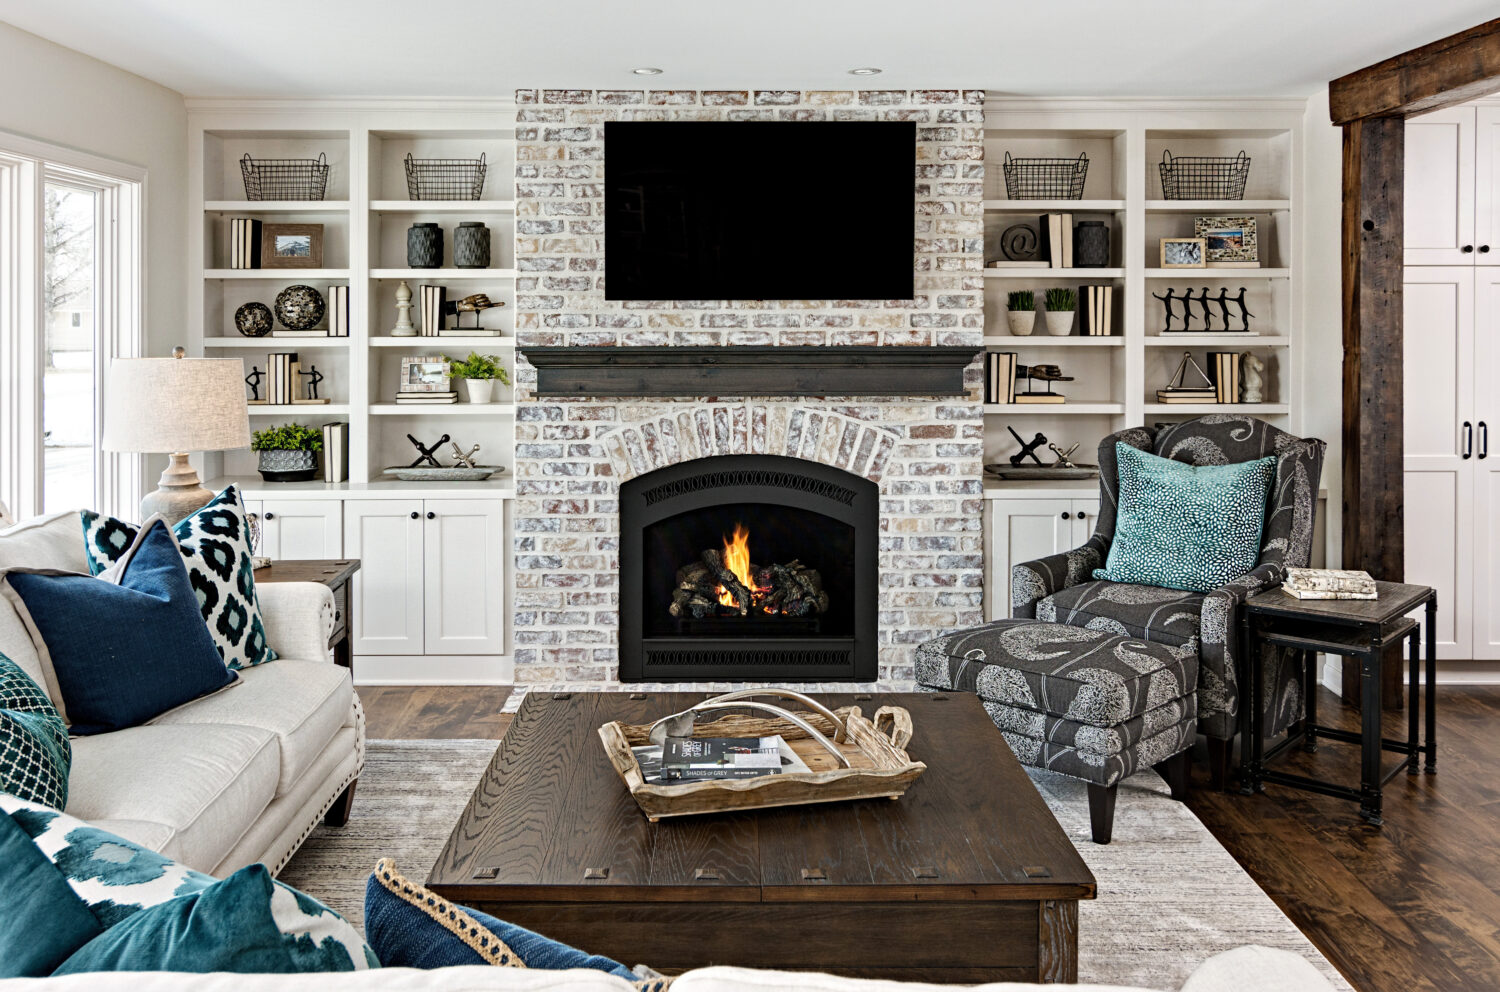 A fireplace entertainment center wall with a TV mounted about the fireplace surrounded by built-in bookcases and a gray stained mantel shelf.